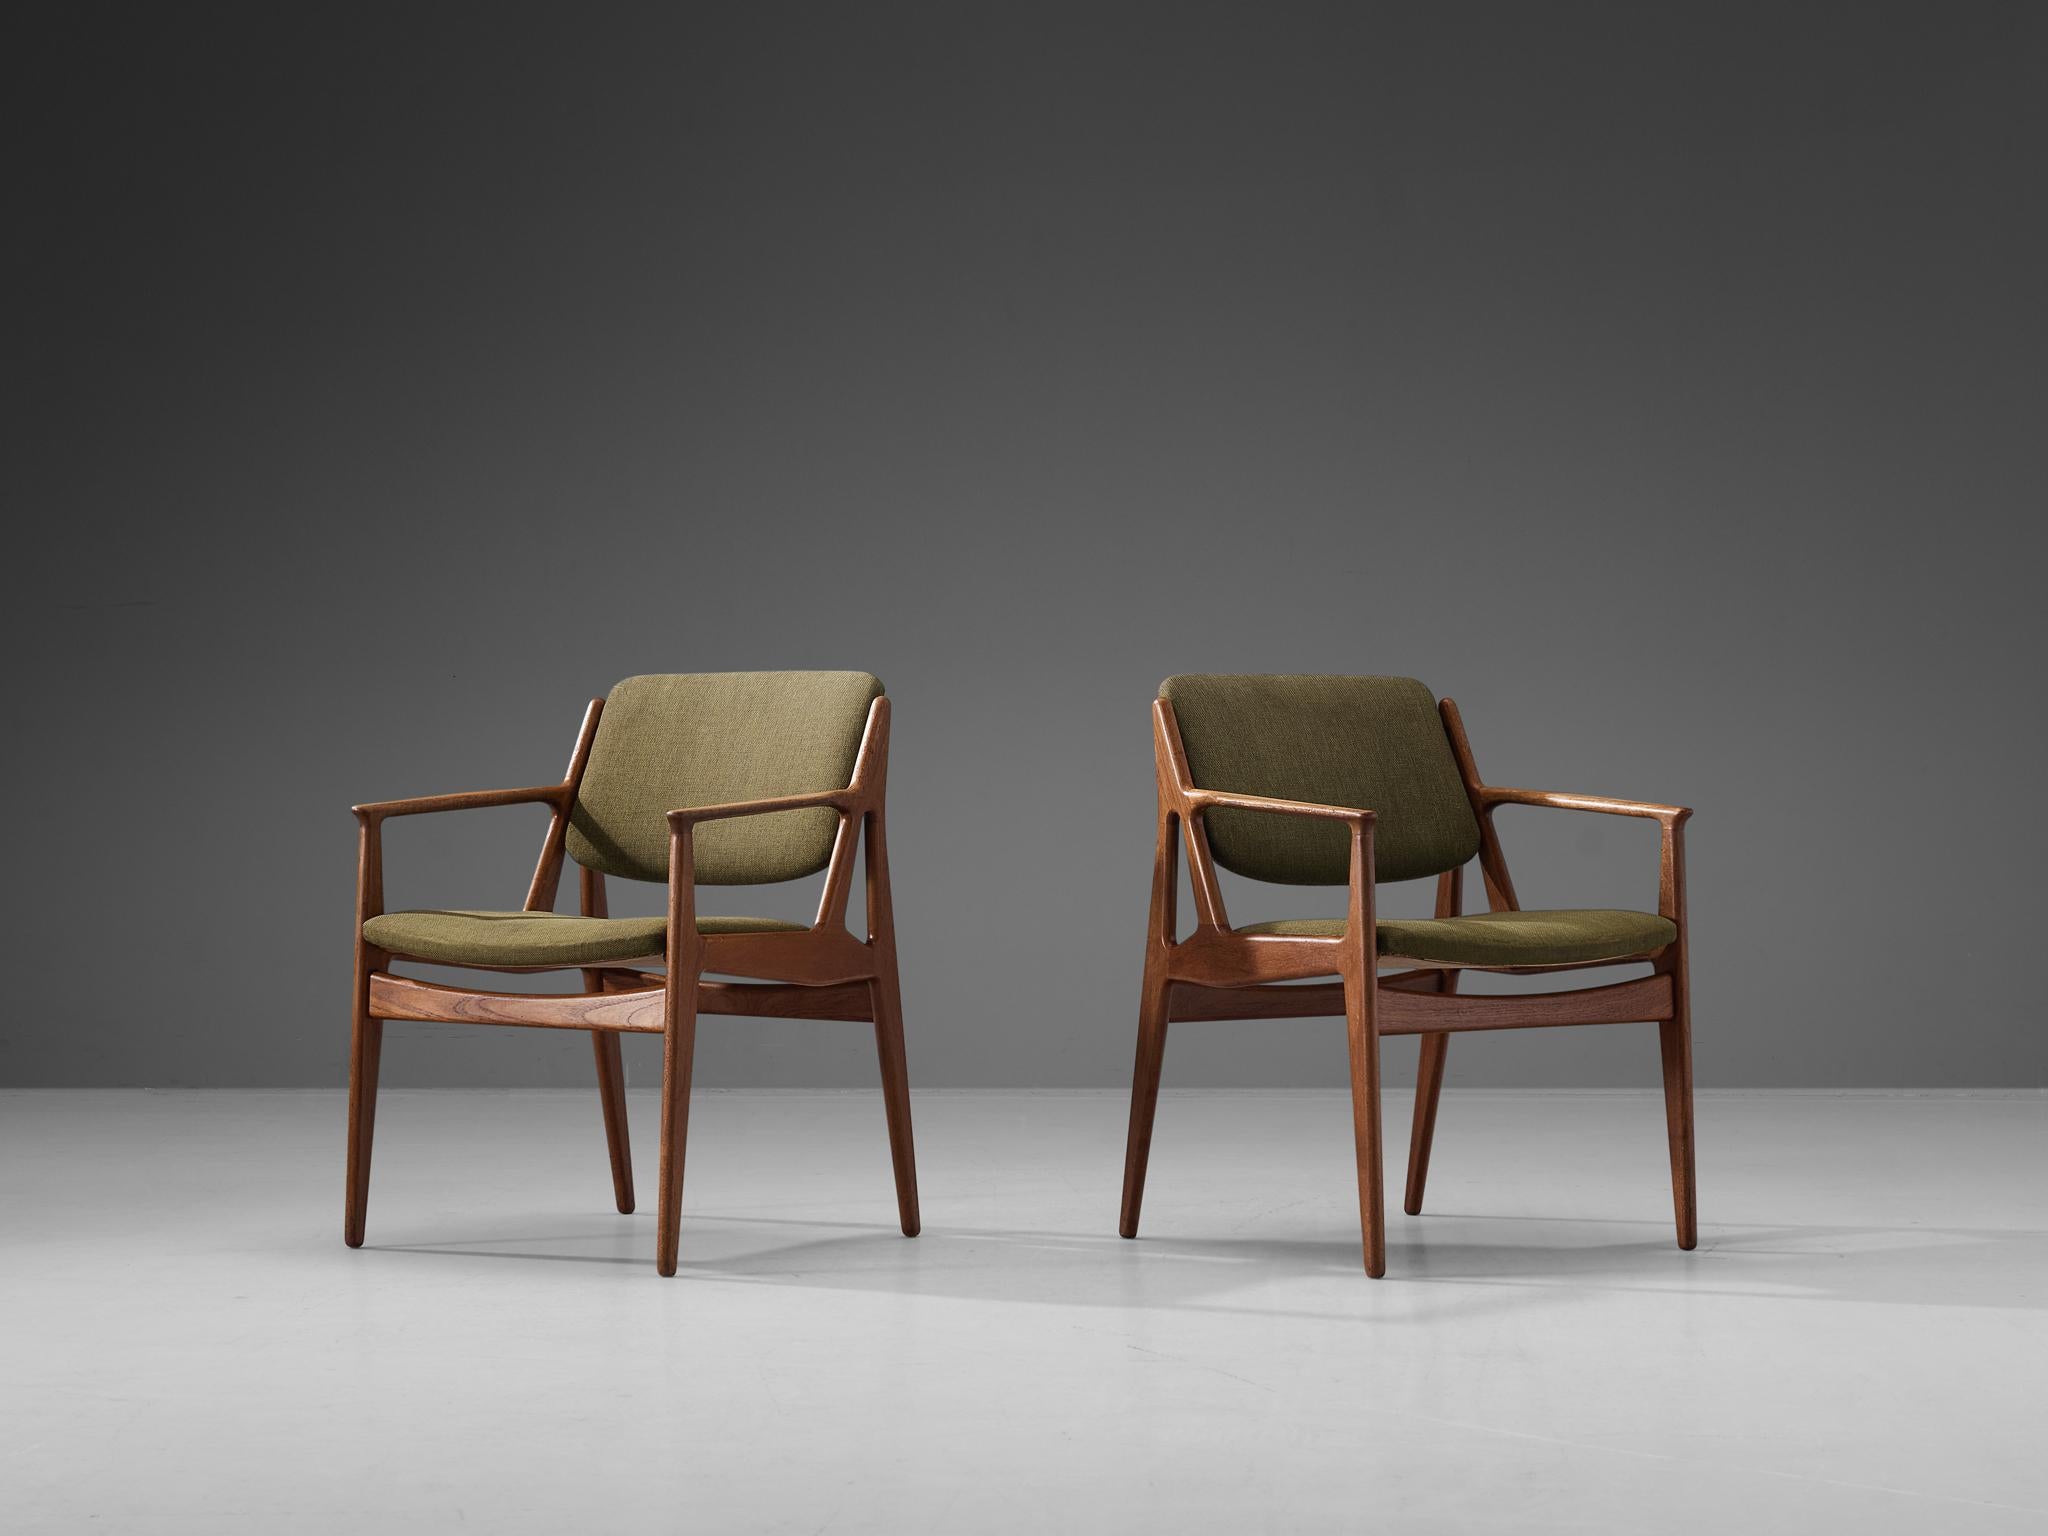 Arne Vodder for Vamo Møbelfabrik, pair of armchairs, model 'Ella', teak, fabric, Denmark, 1960s. 

Pair of 'Ella' armchairs designed by Arne Vodder in the sixties. These elegant armchairs are upholstered in warm olive green fabric. The sculptural